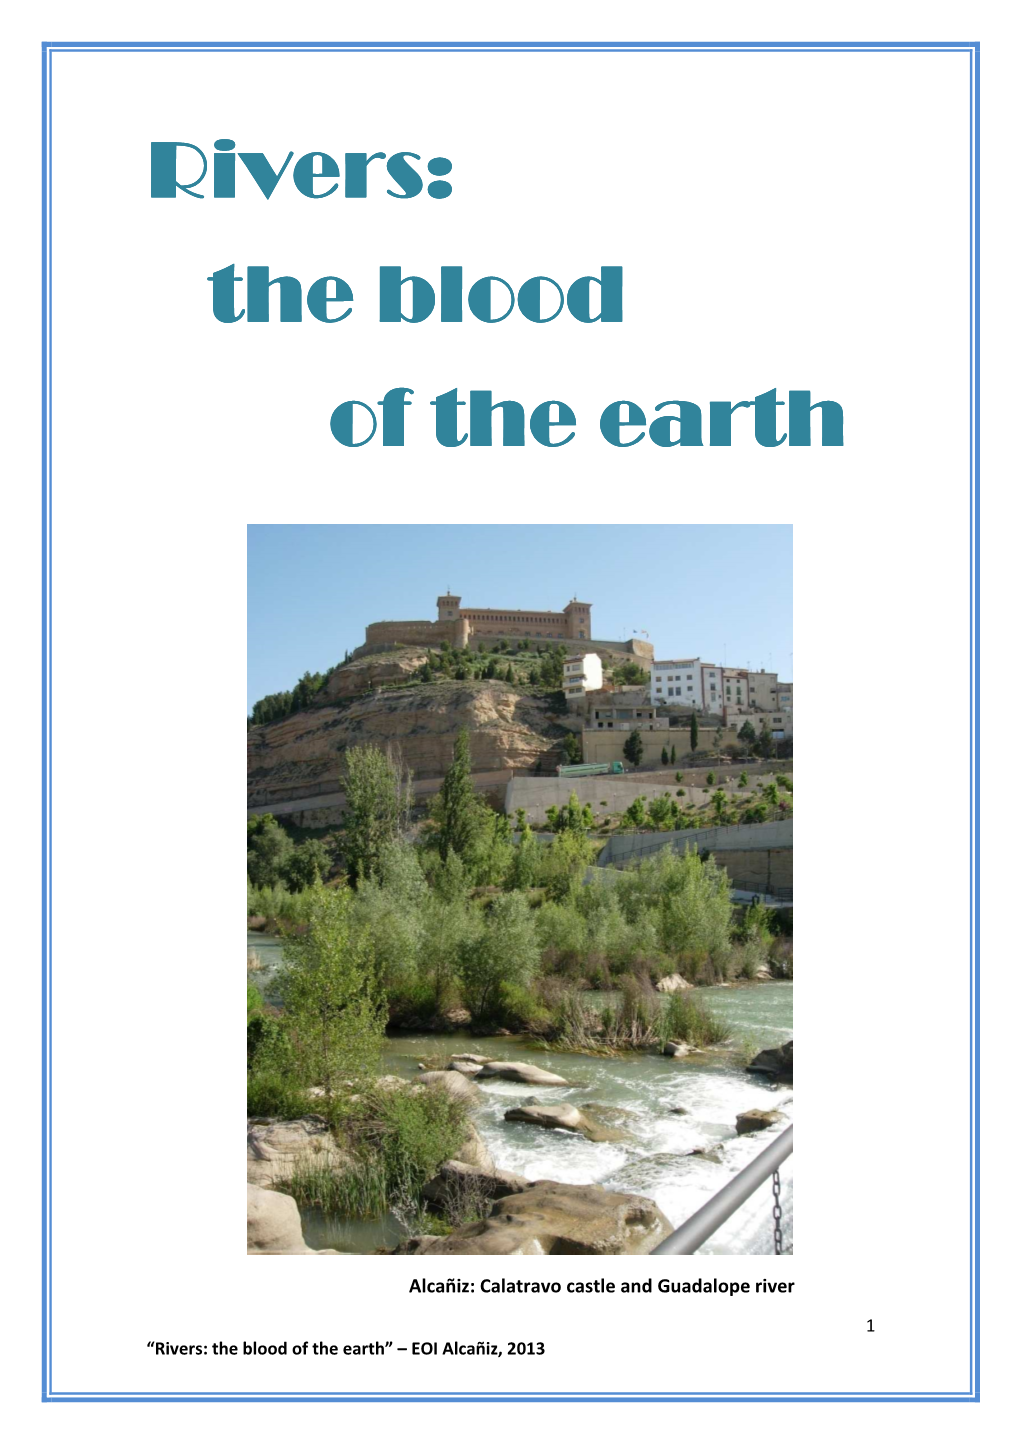 Rivers: the Blood the Blood of the Earth of the Earth